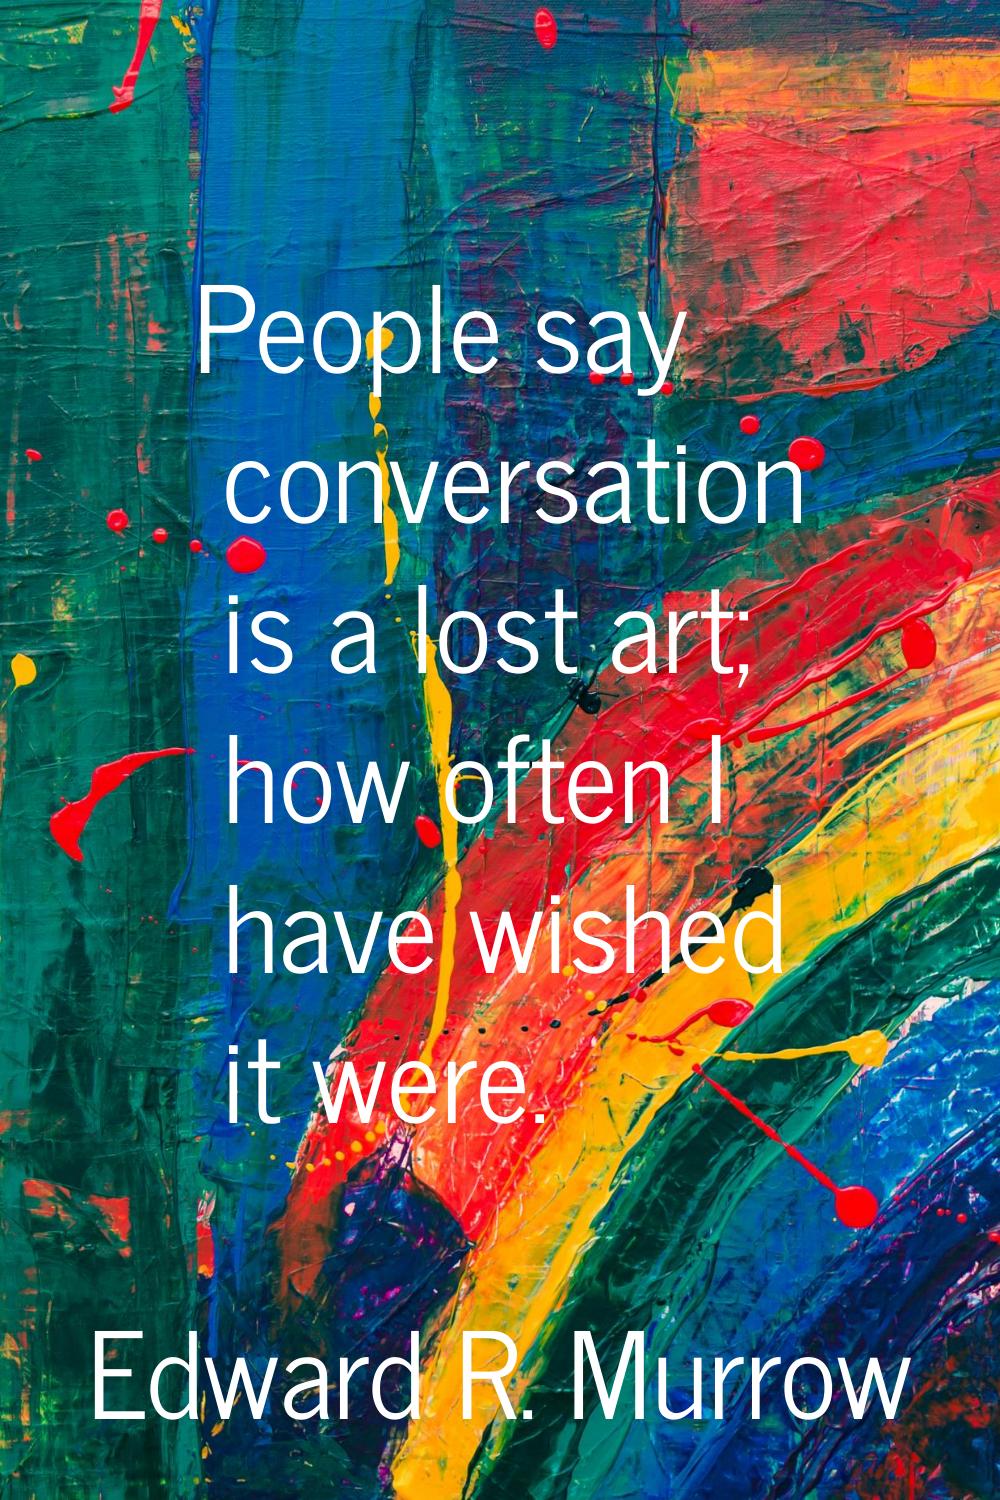 People say conversation is a lost art; how often I have wished it were.